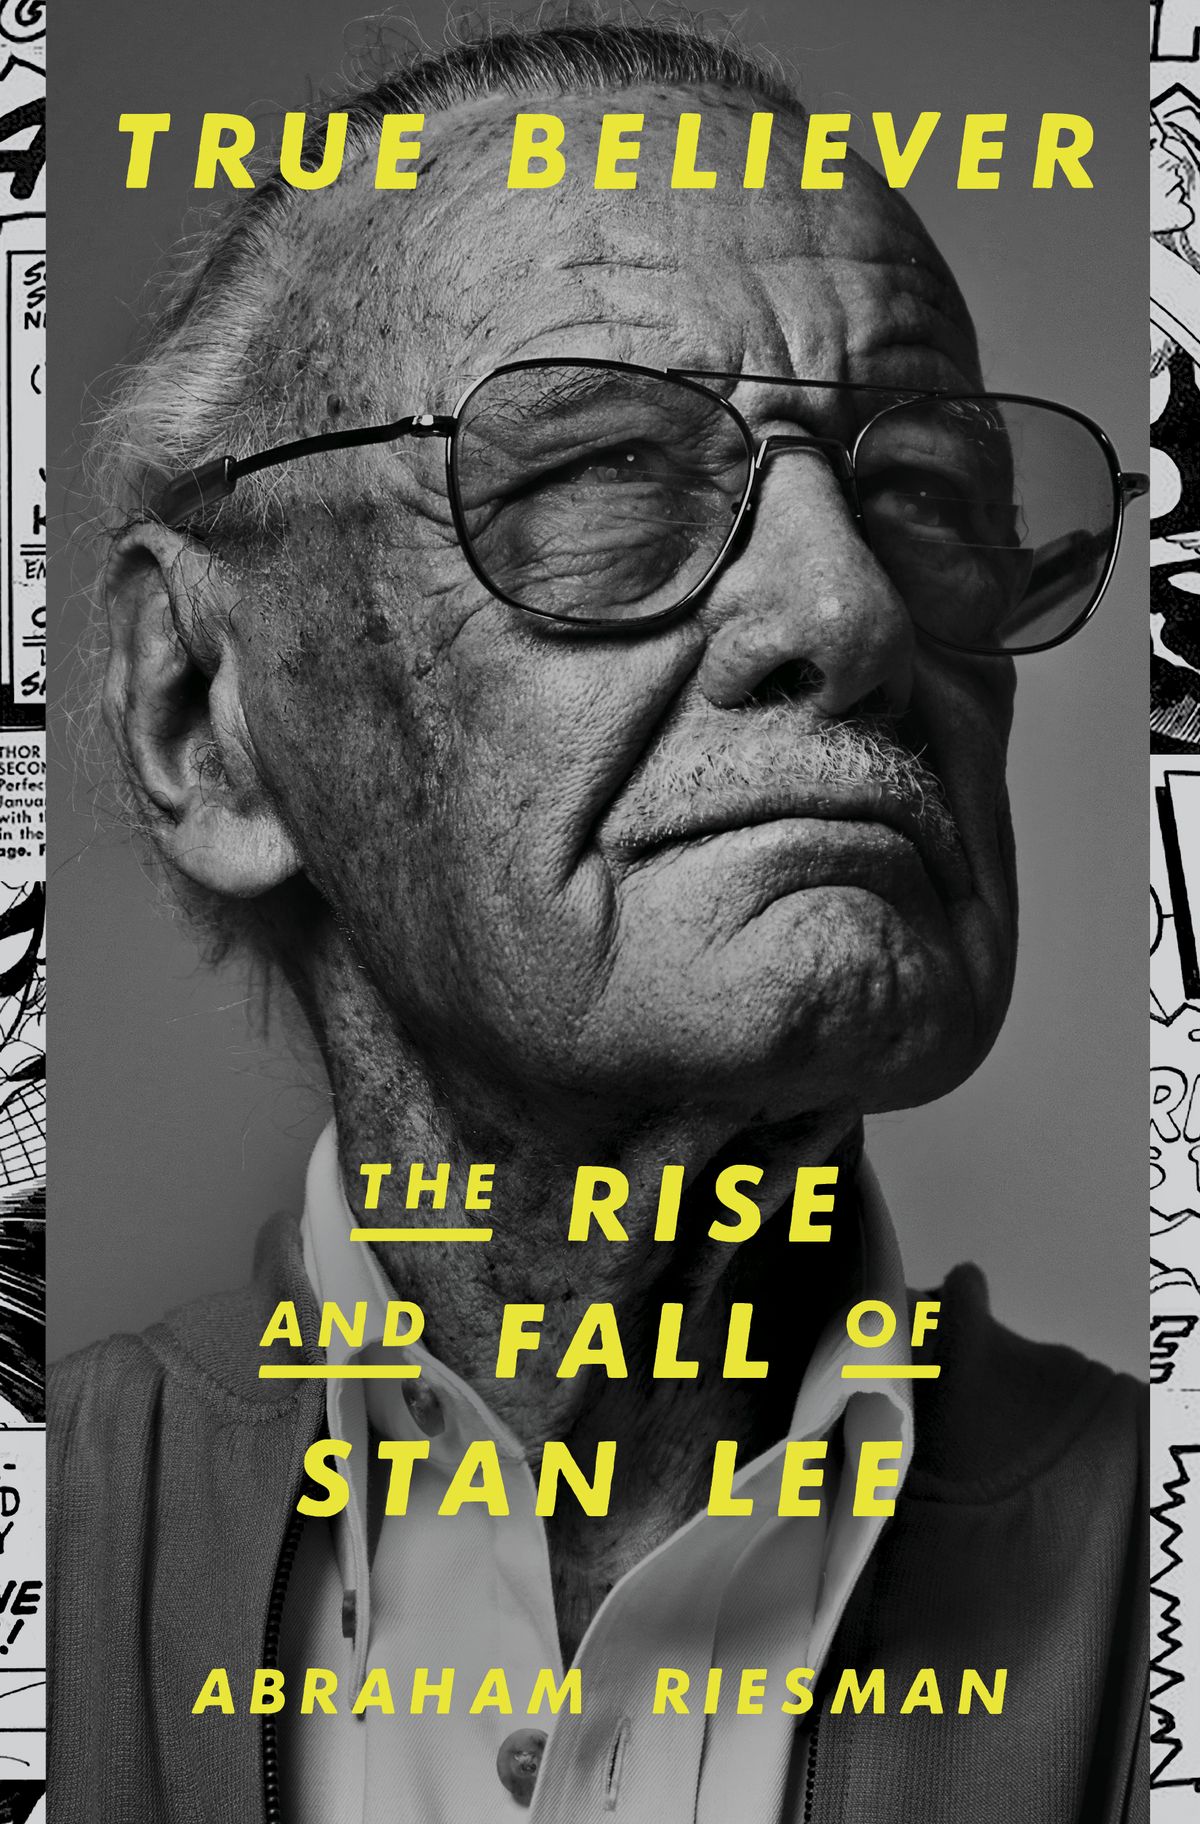 "True Believer: The Rise and Fall of Stan Lee"  (Crown)